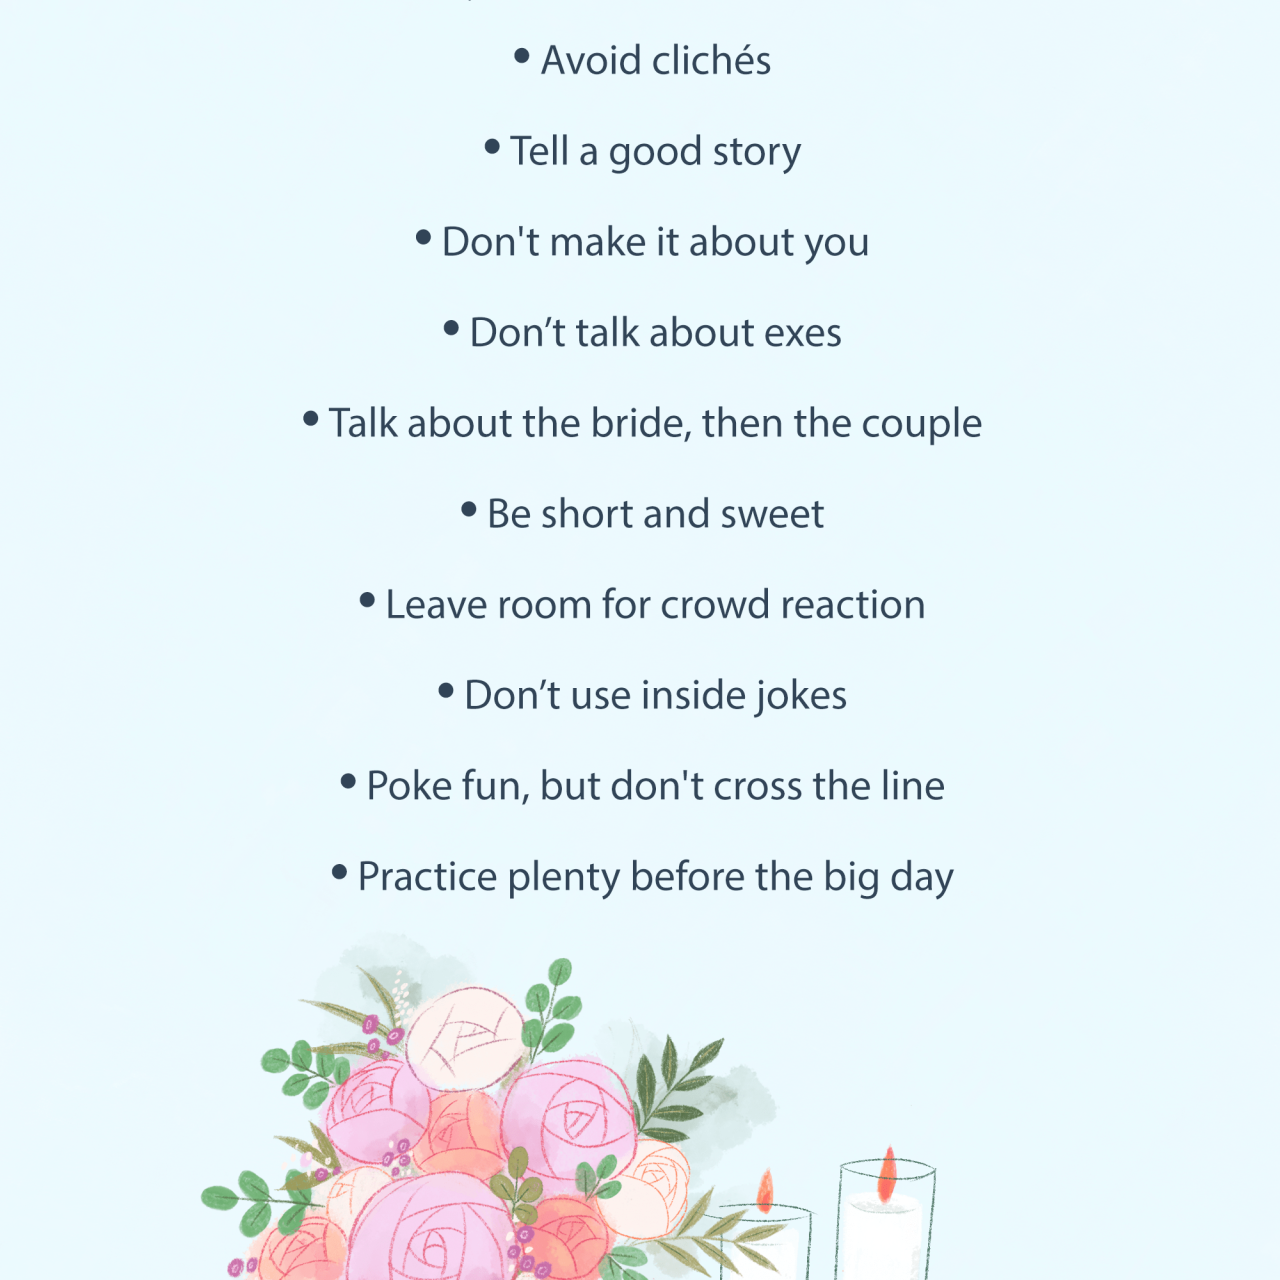 How to Write a Maid of Honor Speech Examples, Tips, and Advice